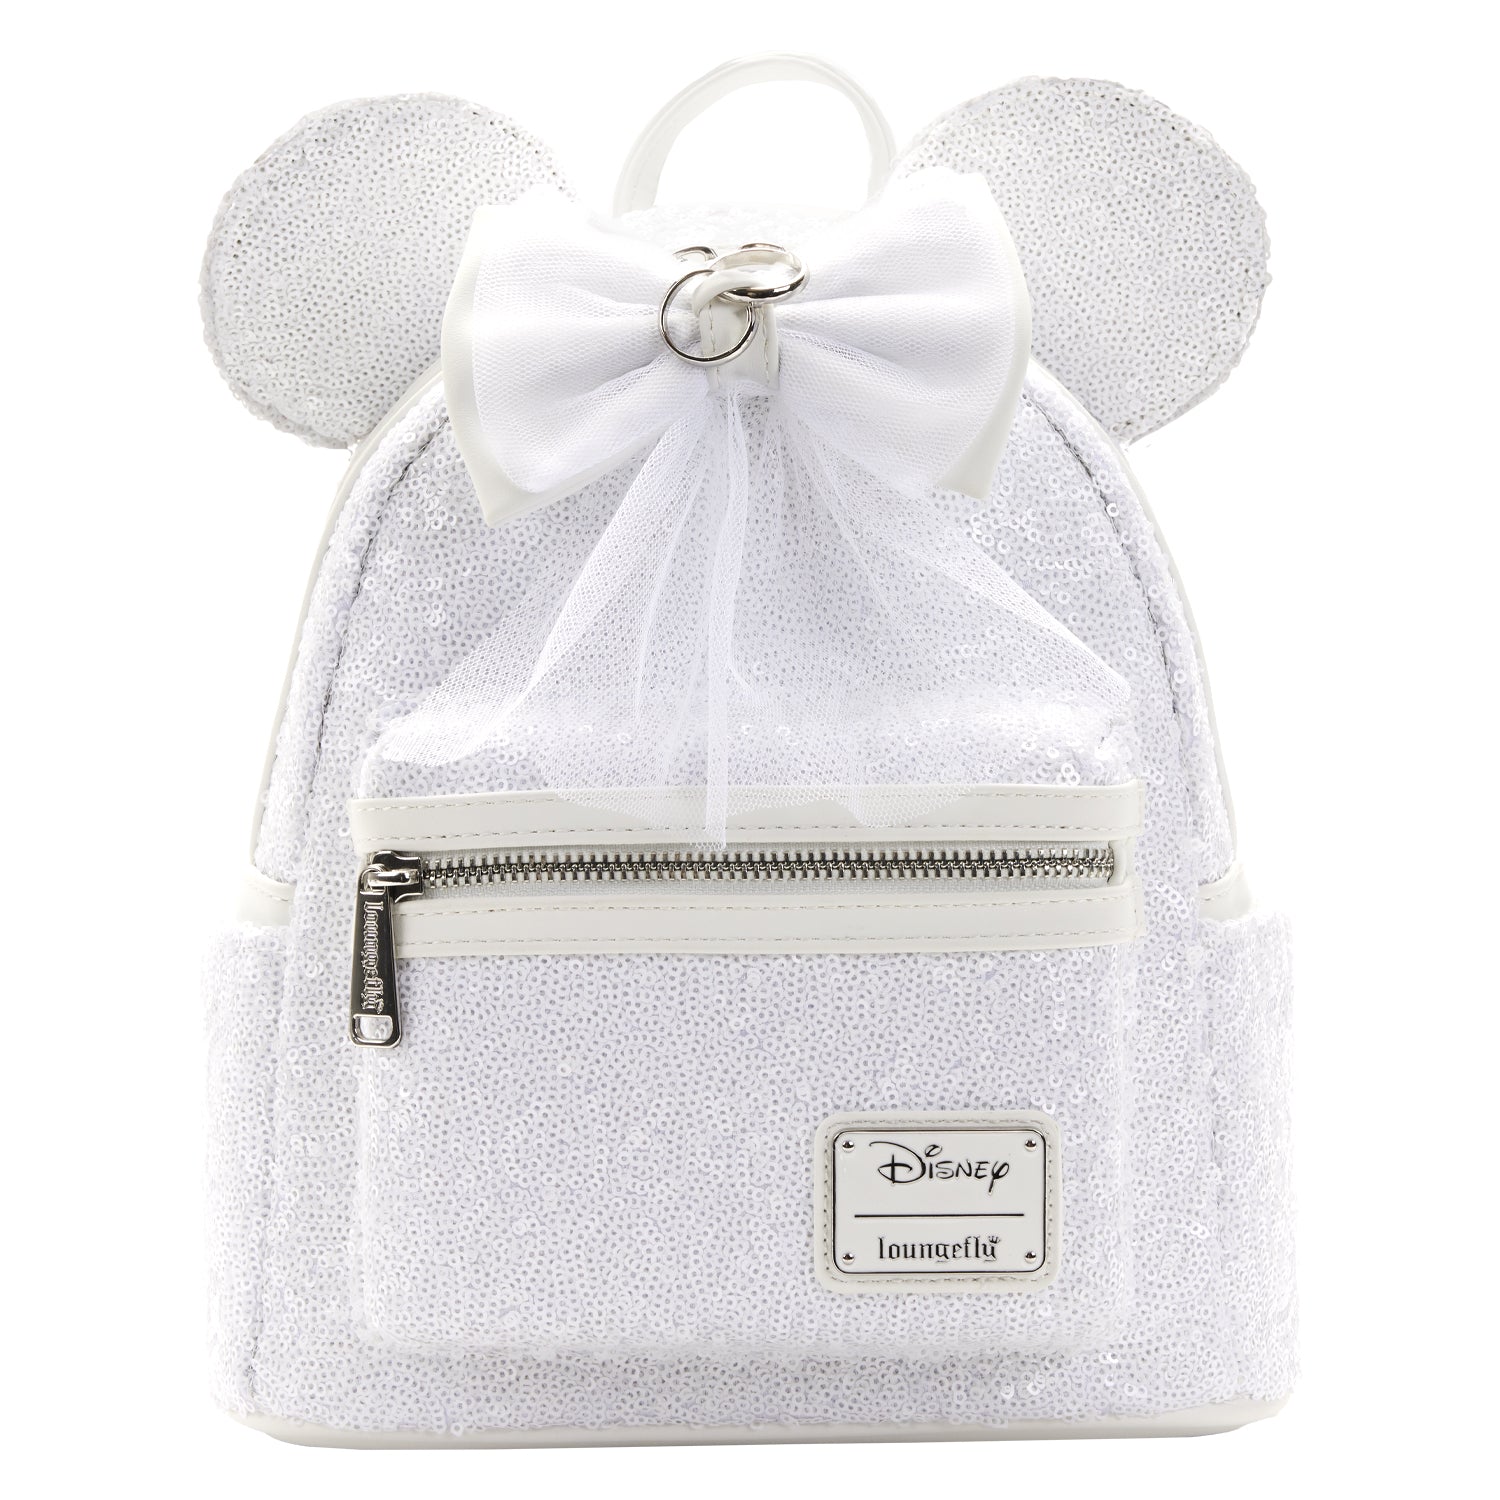 Minnie Ears Wedding Bride mini backpack with veil front view